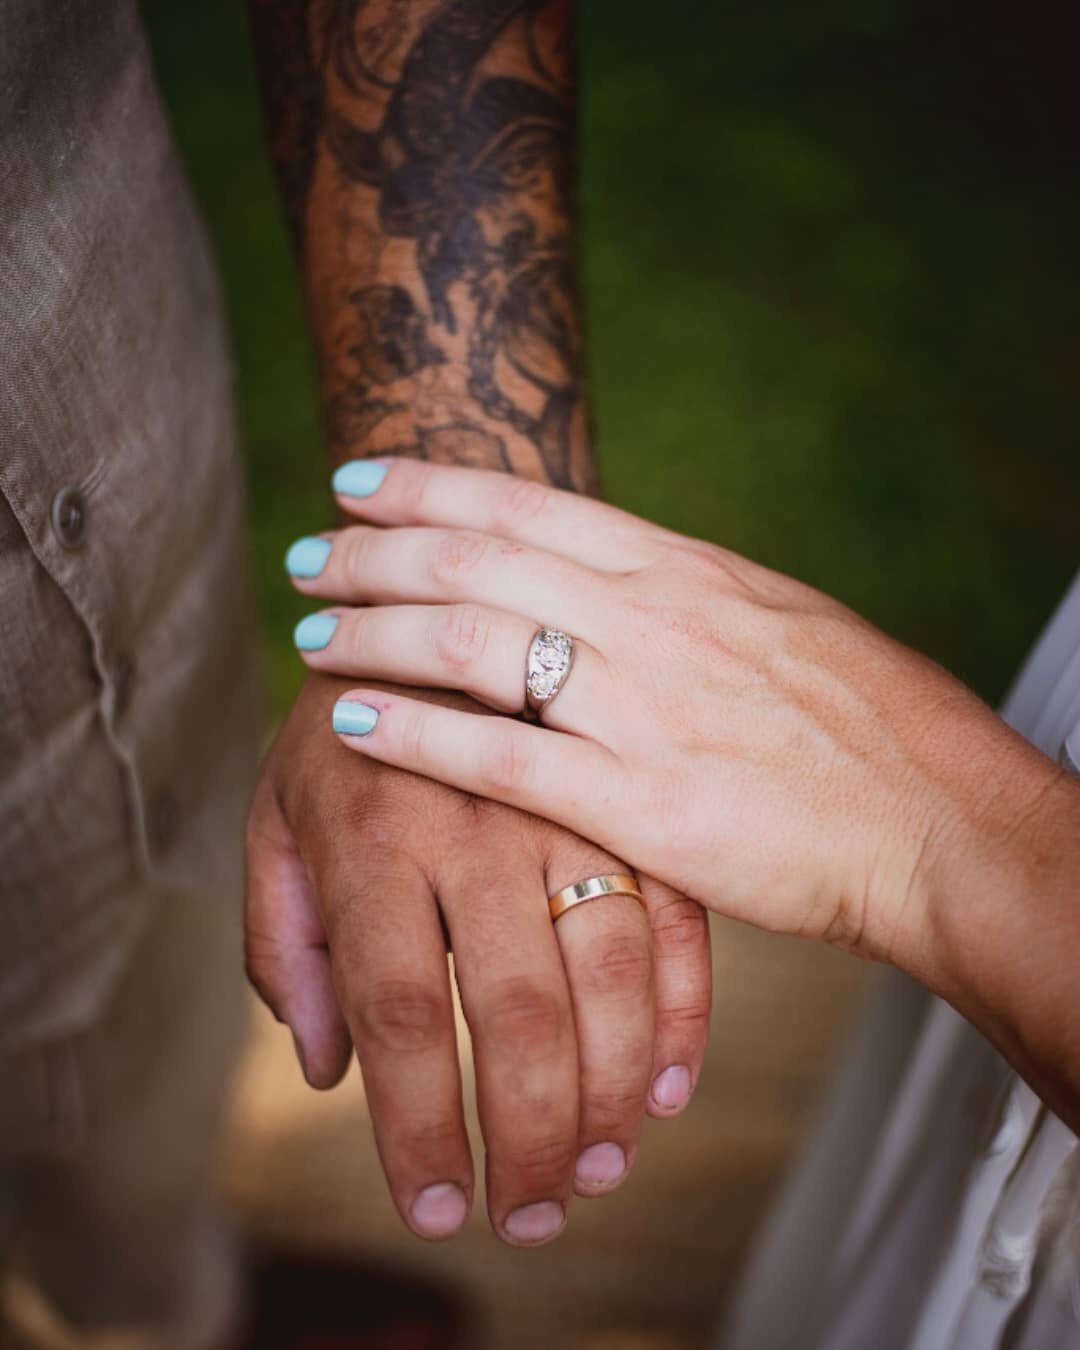 6 months 💕 
.
.
.
Both our rings came from @bijouofkatonah 💎 We had mine custom designed with gold from dad's wedding band &amp; heirloom diamonds from Will's great grandma.
.
I wanted a band that could stand on it's own so I wouldn't have to worry